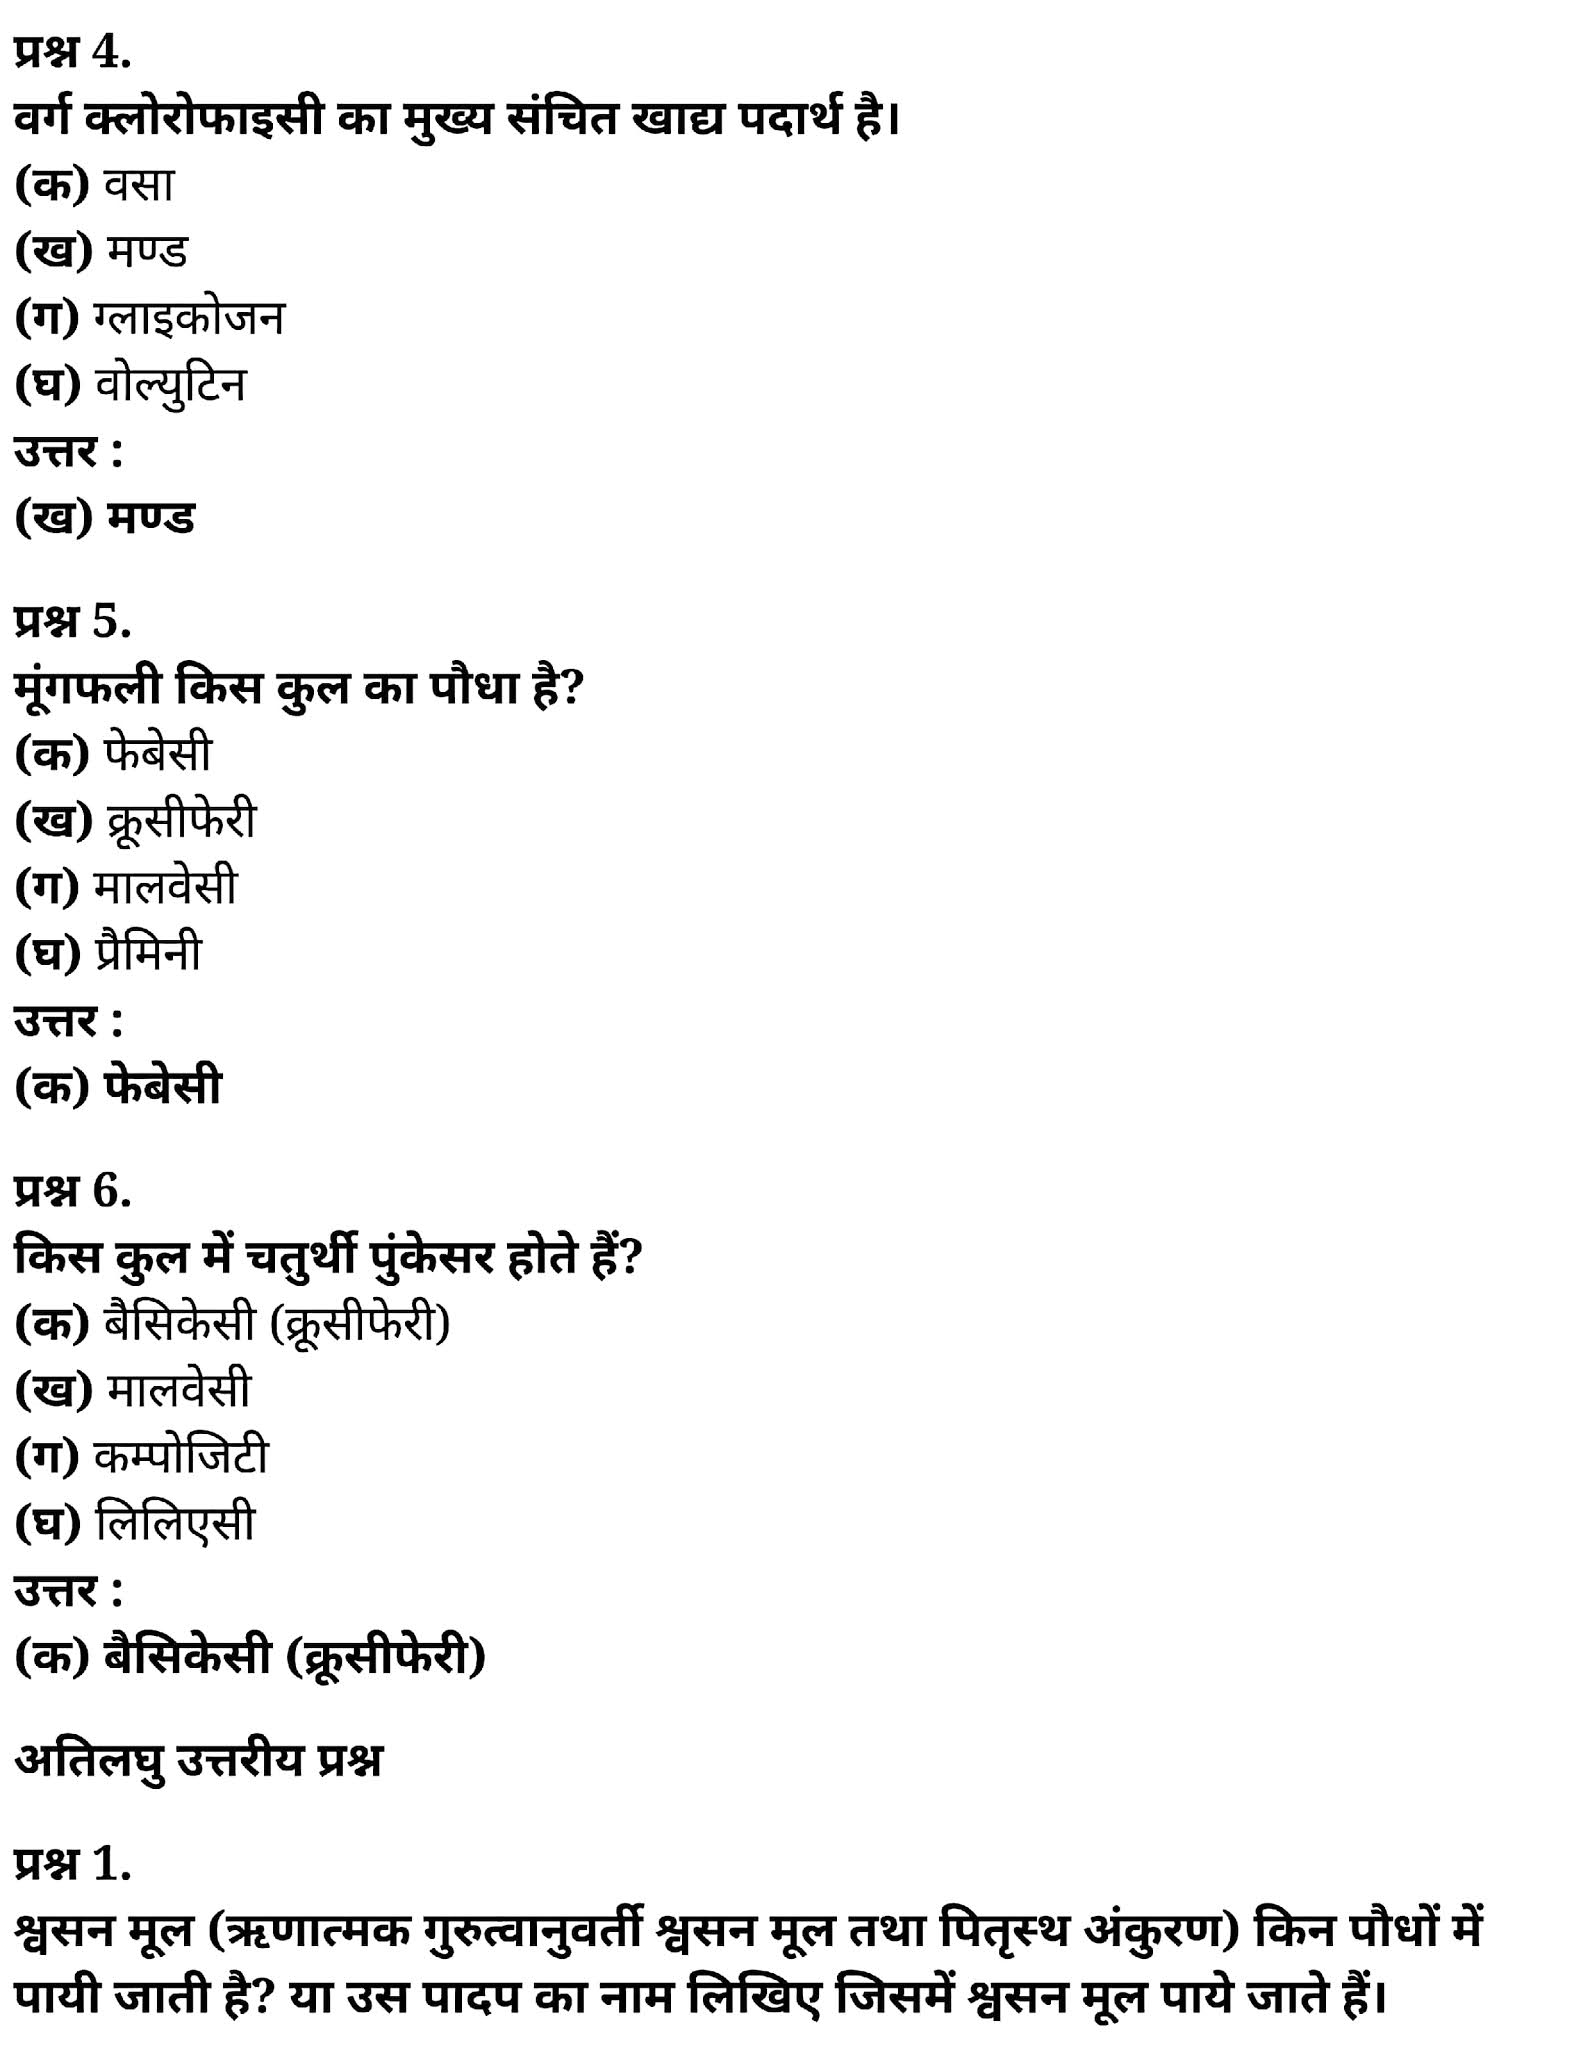 class 11 biology chapter 5 notes in hindi 21